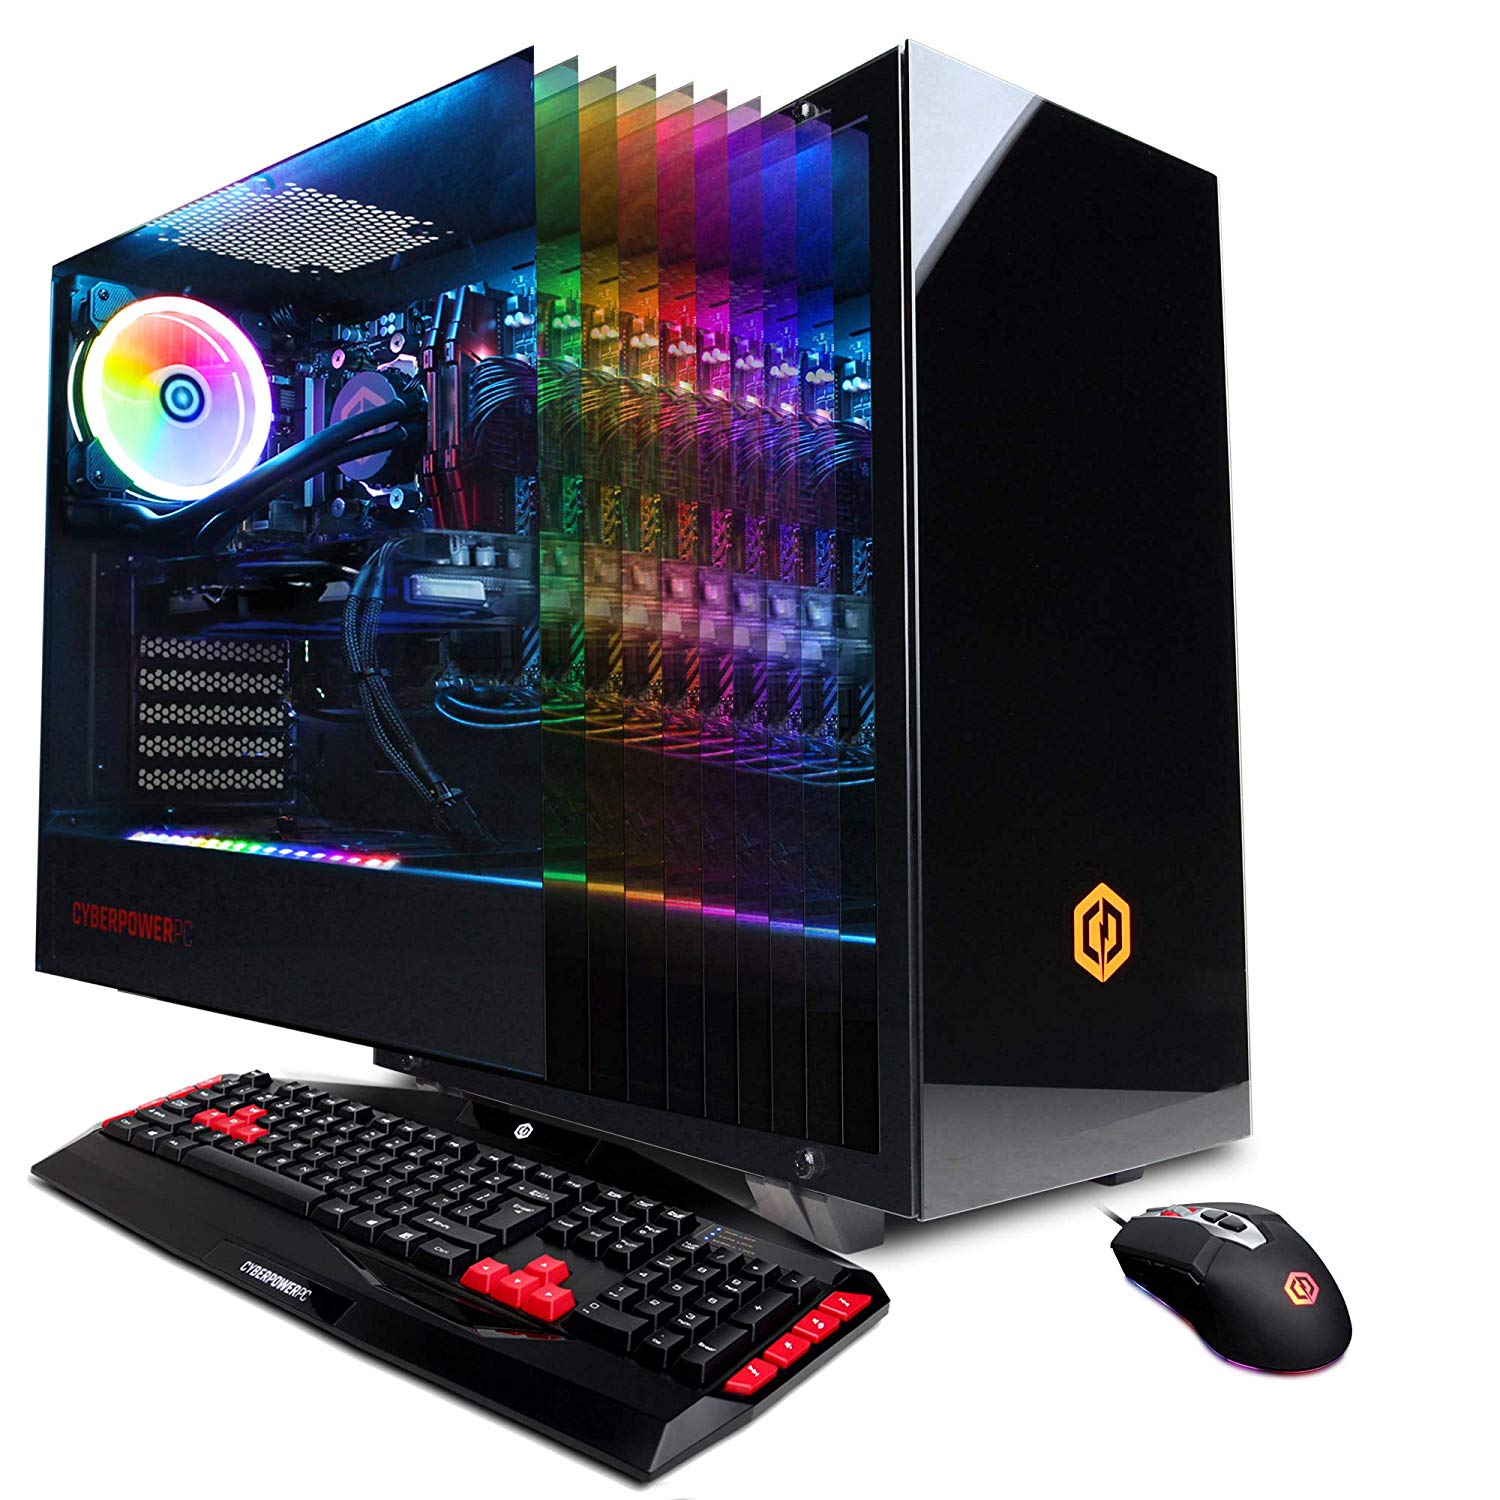 Image for Enjoy up to 40% off gaming peripherals, laptops and desktops today at Amazon US